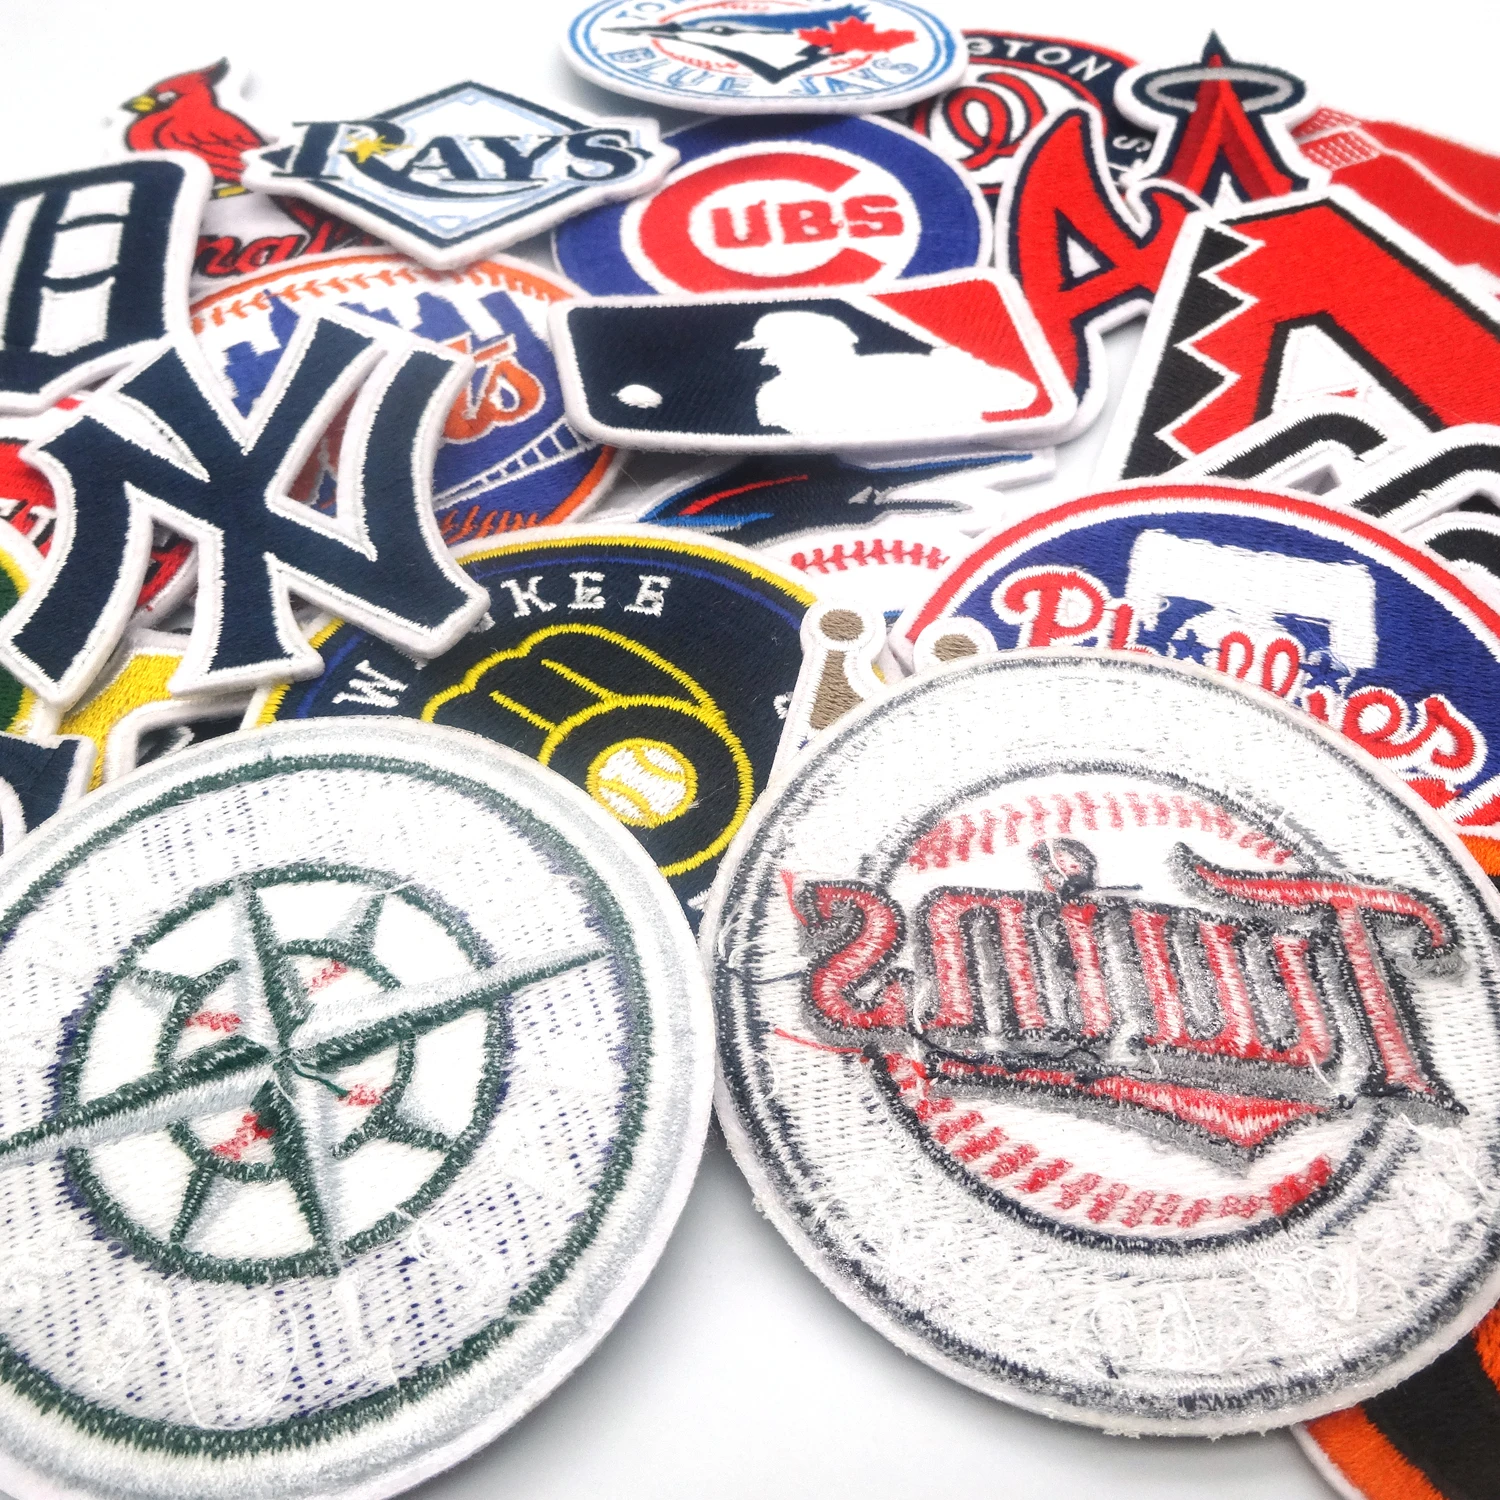 New 33 MLB Major League Baseball Logo embroidered iron on patch.